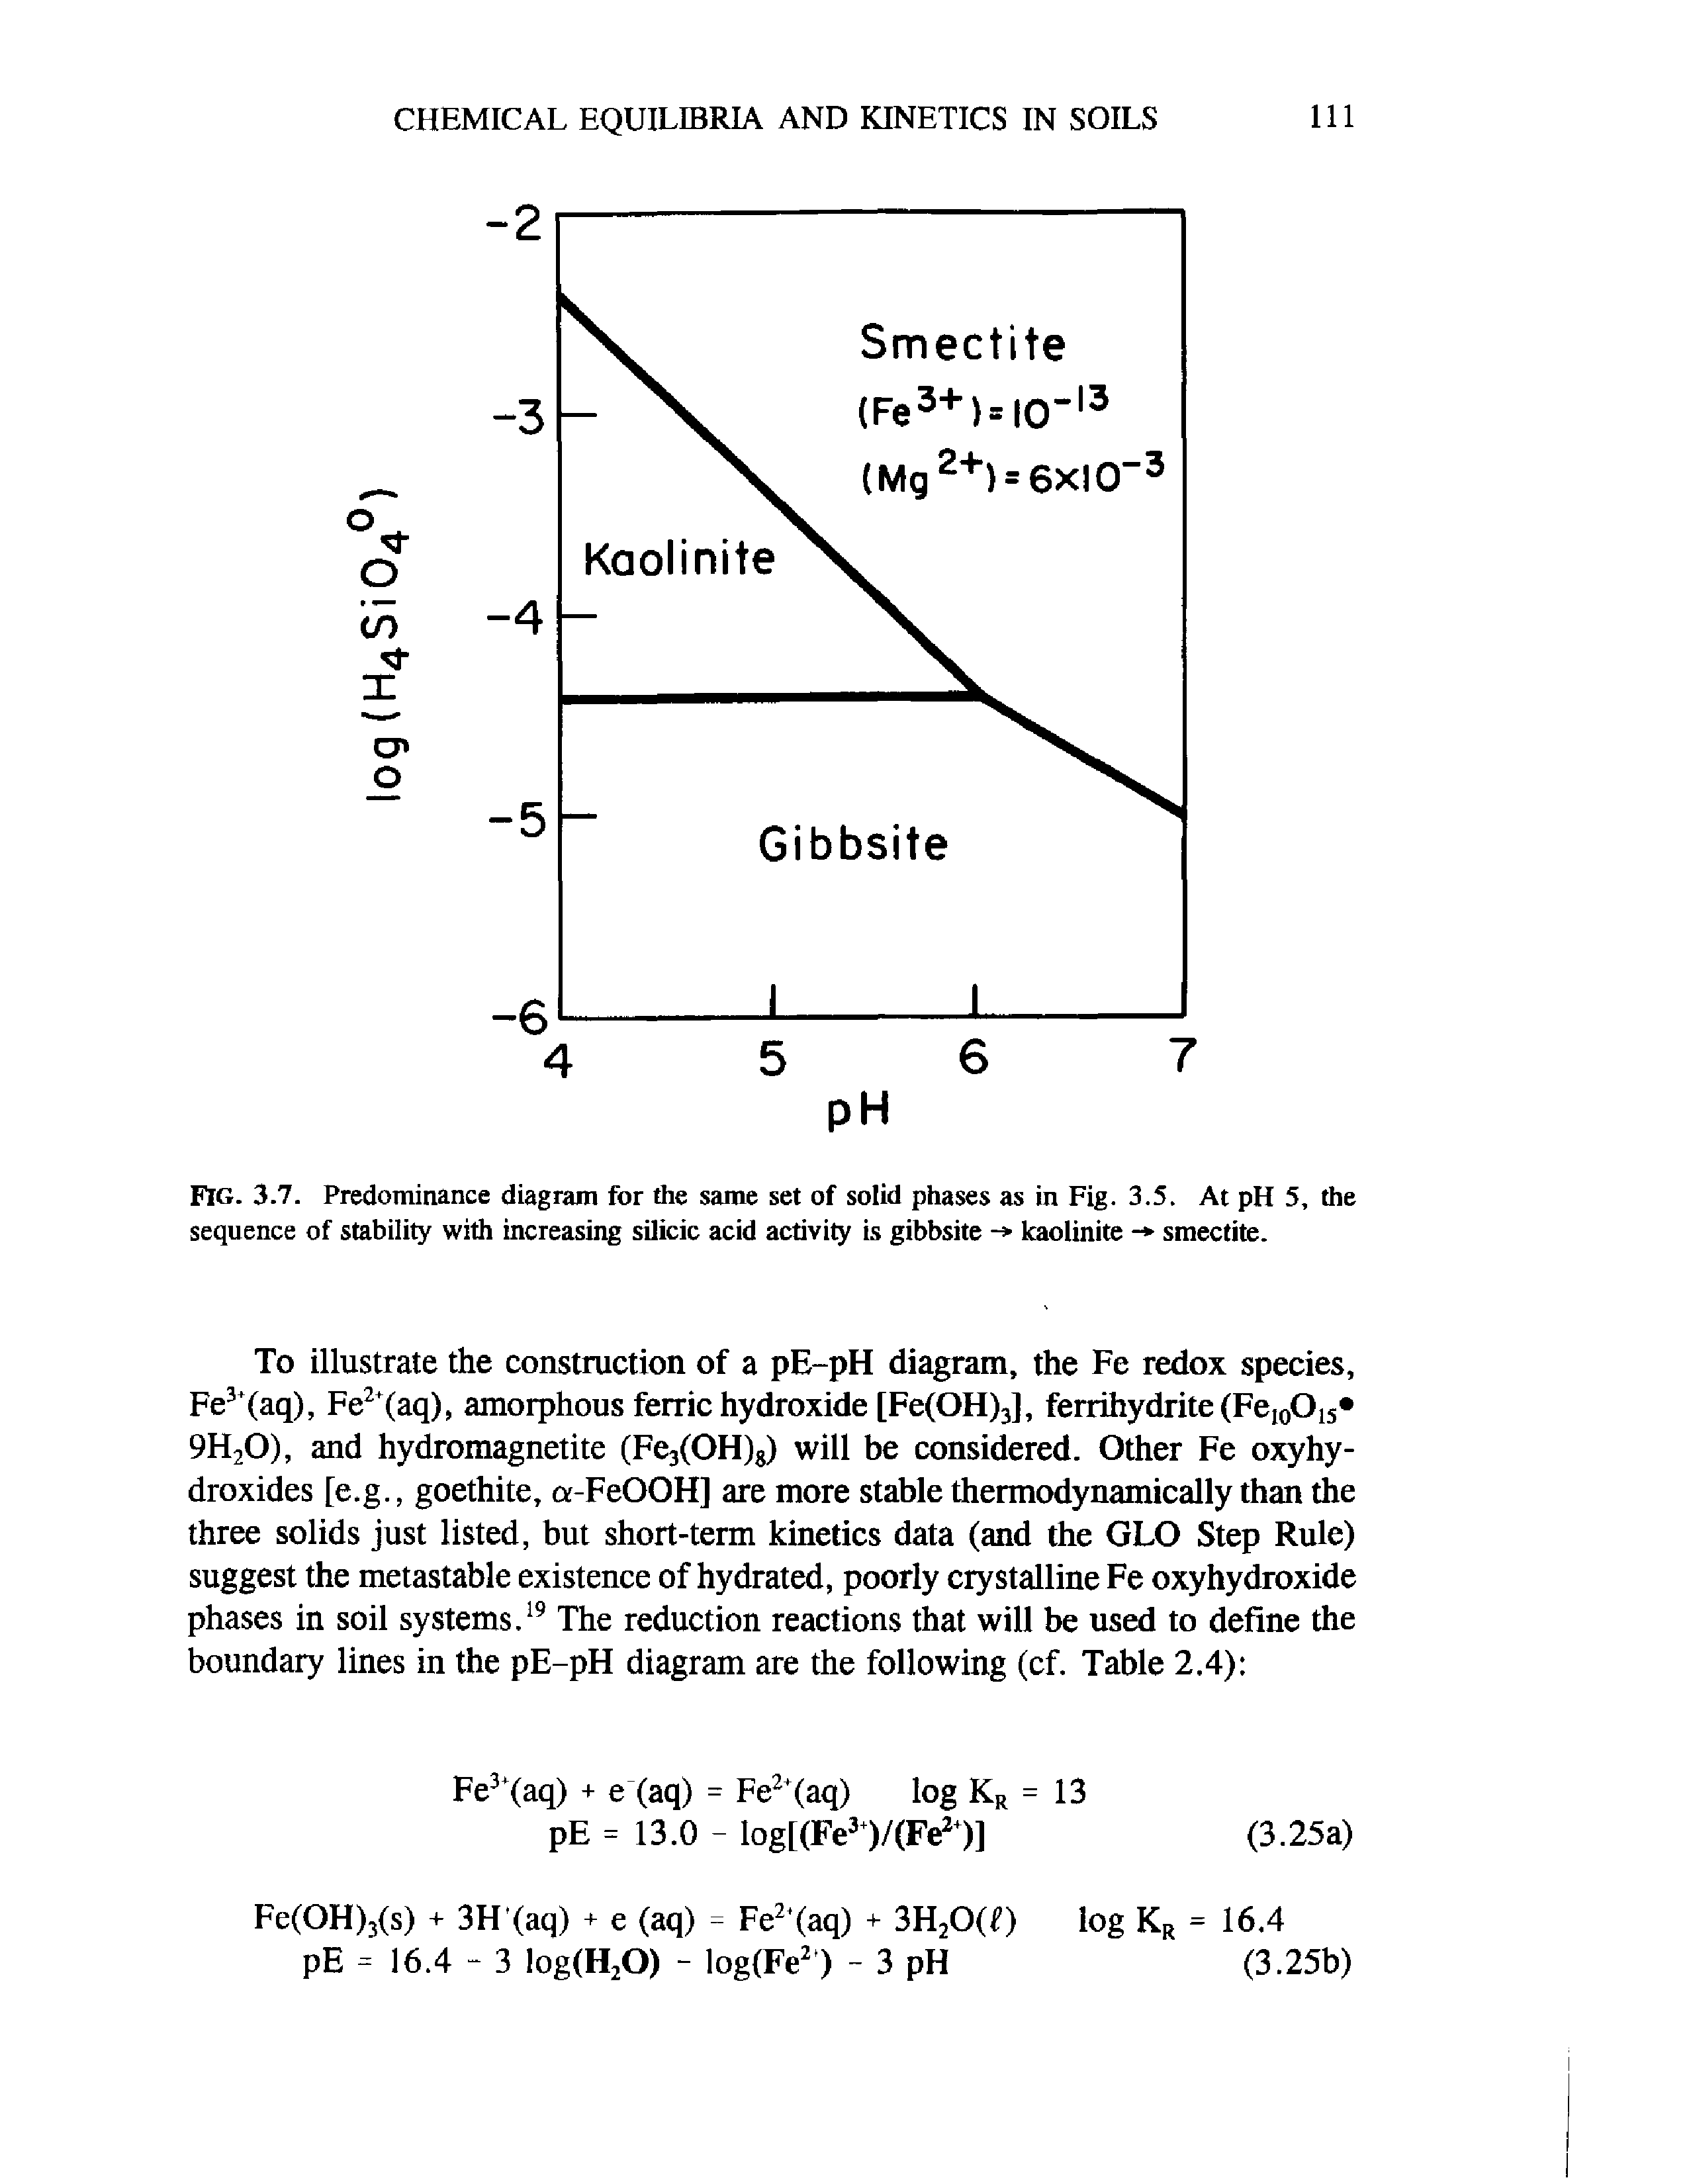 Fig. 3.7. Predominance diagram for the same set of solid phases as in Fig. 3.5. At pH 5, the sequence of stability with increasing silicic acid activity is gibbsite -> kaolinite - smectite.